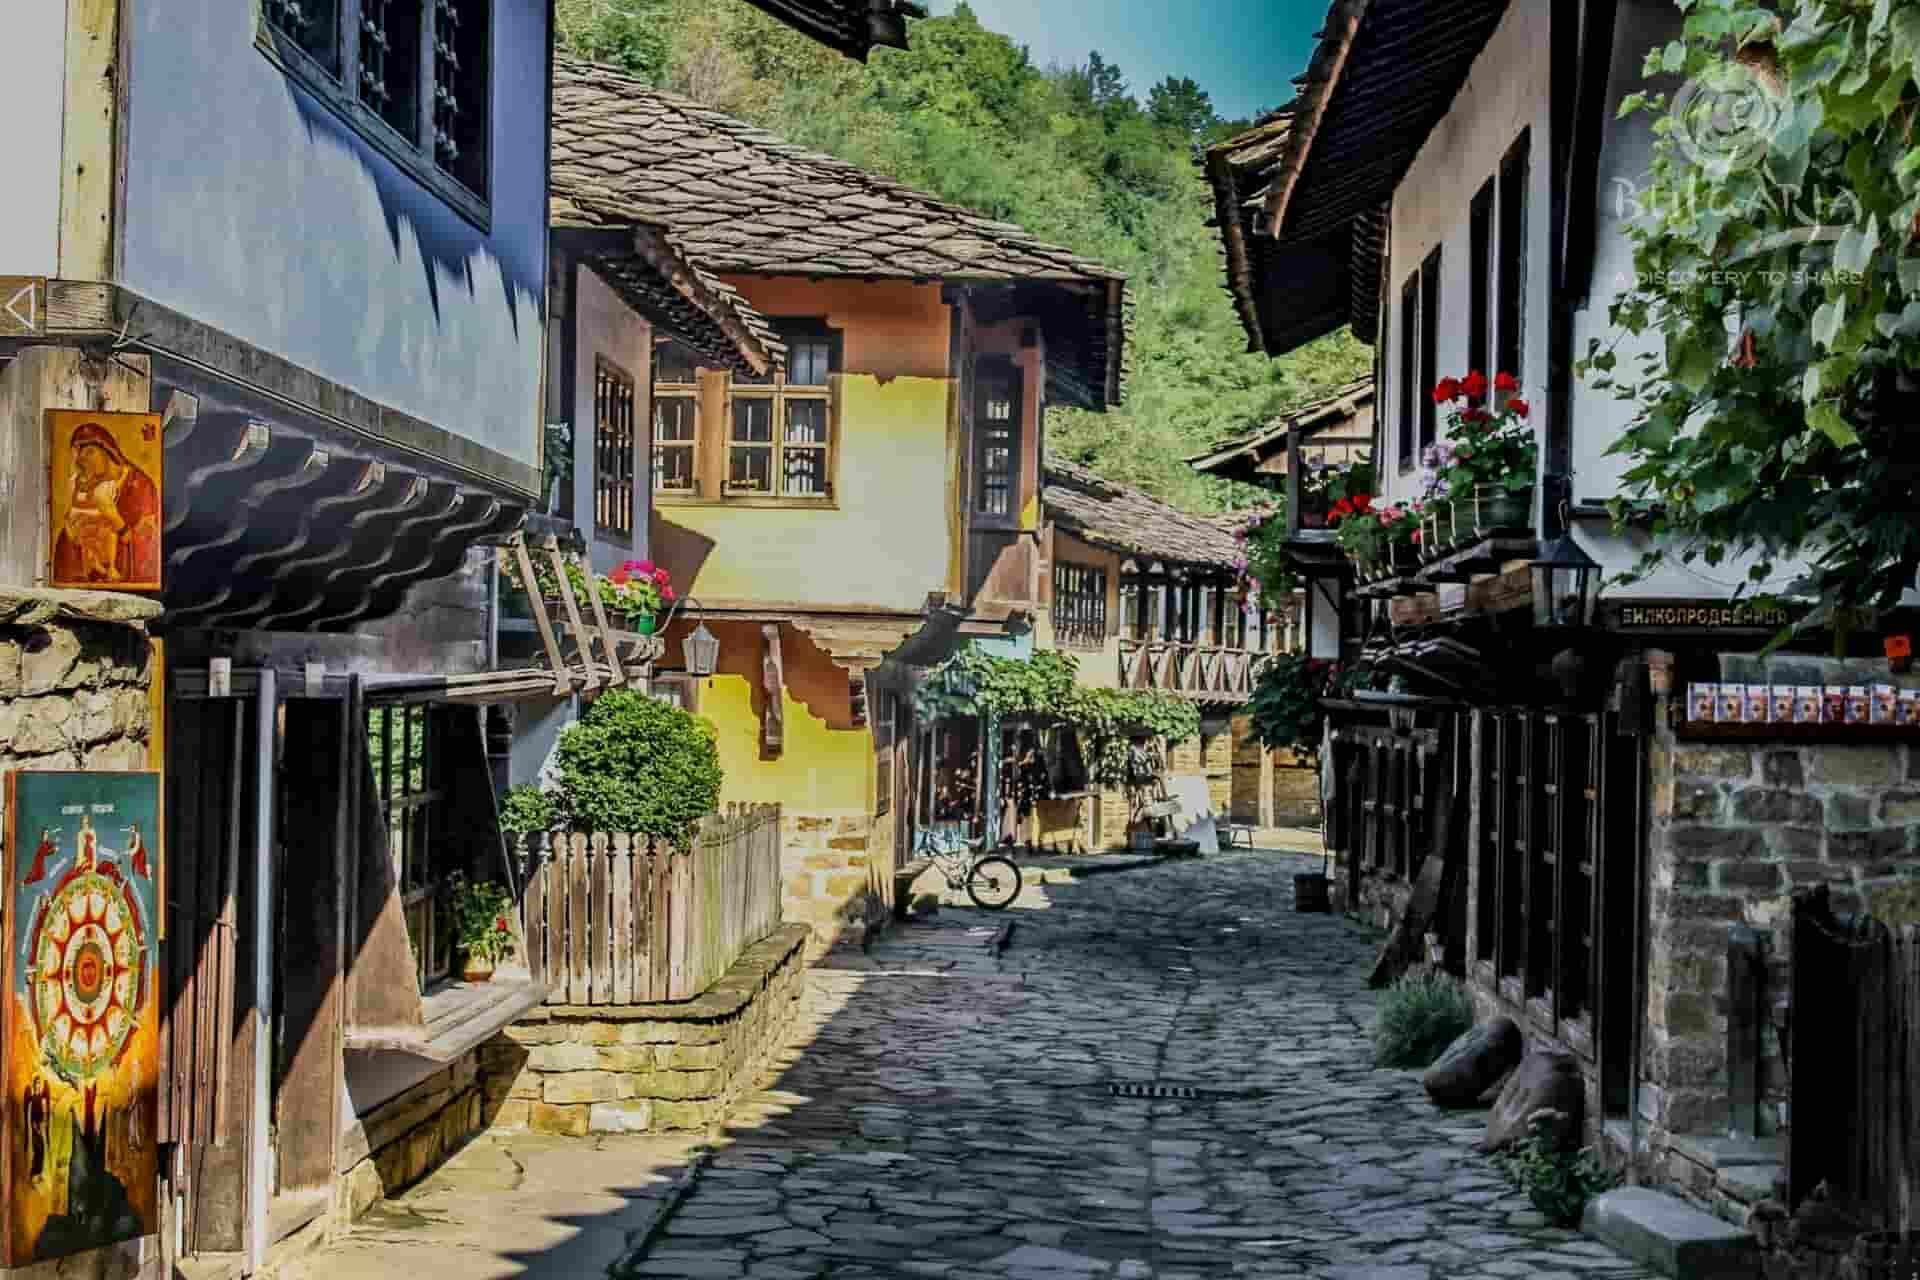 A quaint village street with cobblestones, surrounded by charming buildings and greenery